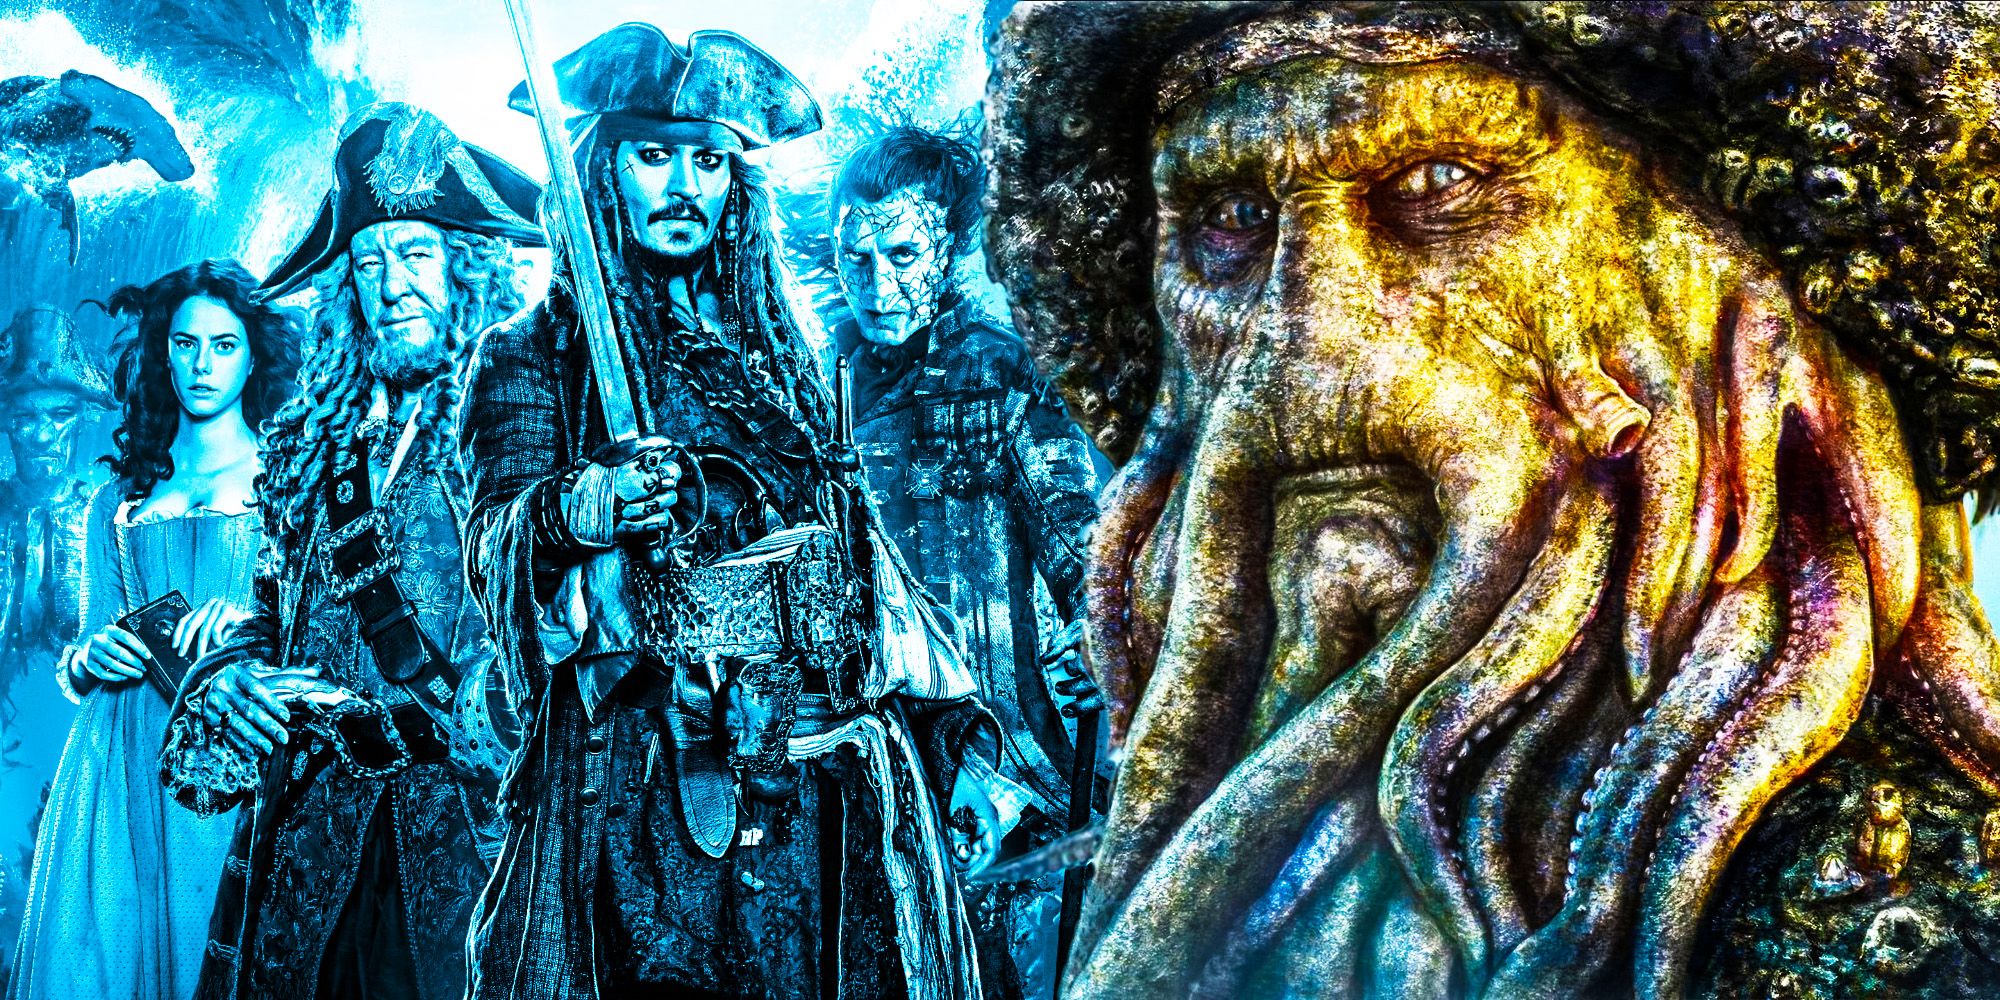 A Davy Jones Prequel Is The Best Way To Save Pirates of the Caribbean